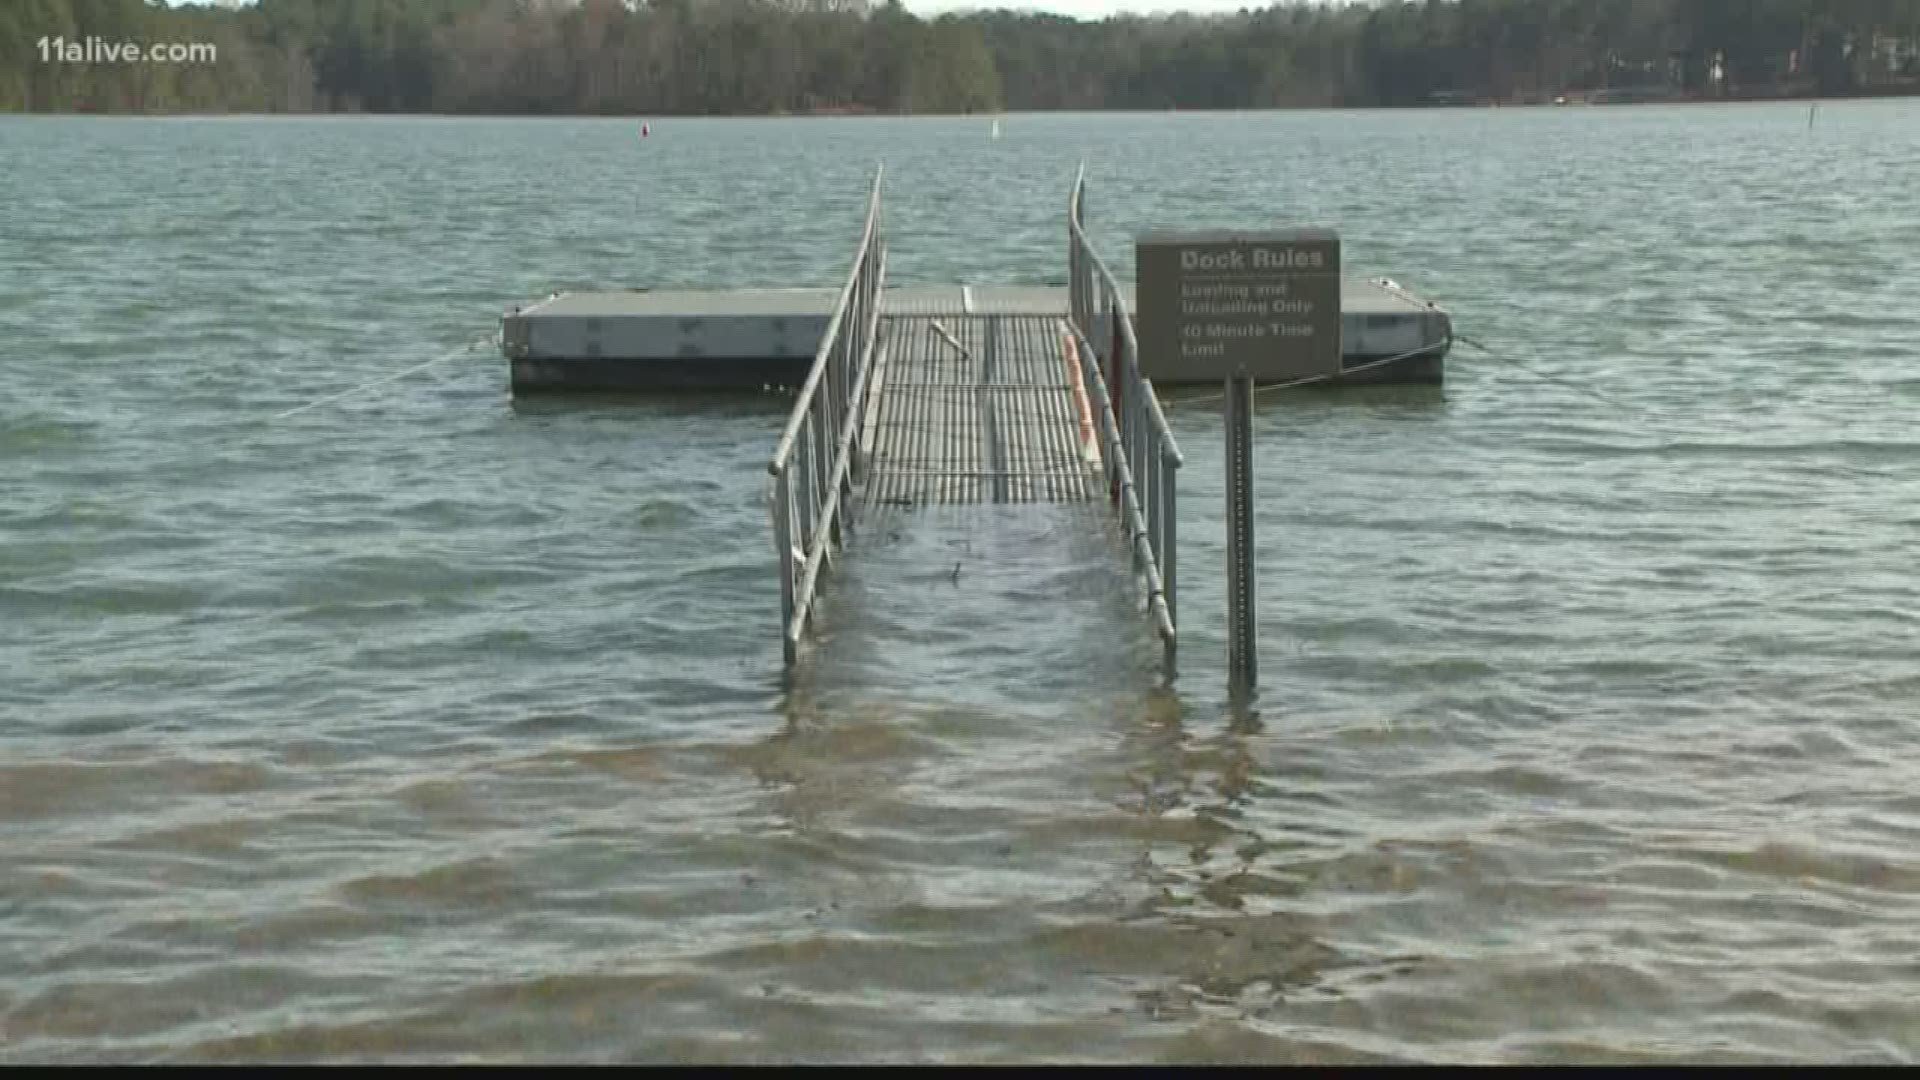 Lake Lanier water level reaches second highest point on record | 11alive.com